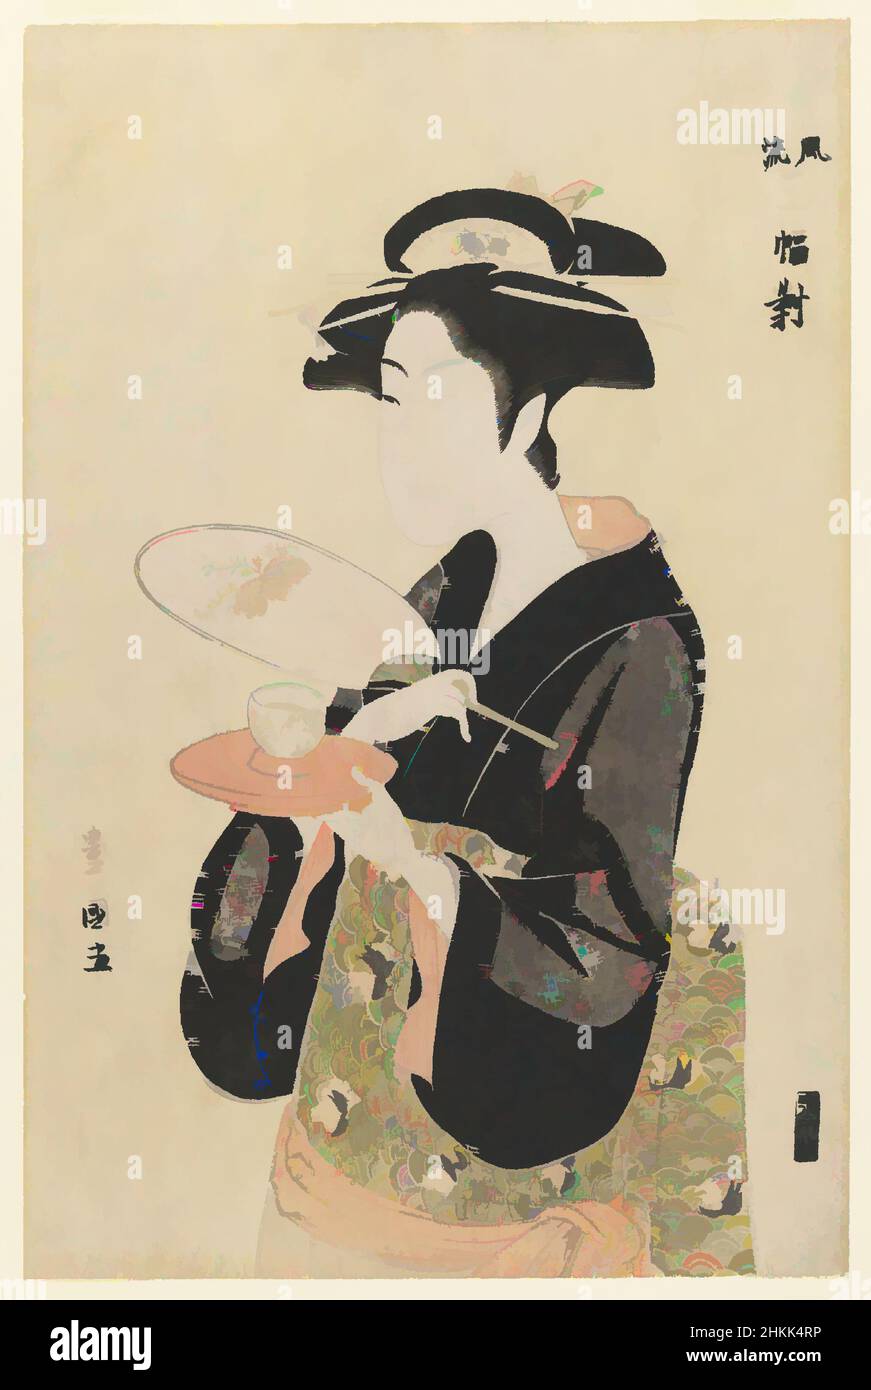 Art inspired by Okita of Naniwaya, from A Fashionable Triptych, From the series: 'Furyu Sanpuku-tsui', Utagawa Toyokuni I, Japanese, 1769-1825, Color woodblock print on paper, Japan, ca. 1793-1794, Edo Period, 14 3/4 x 9 5/8 in., 37.5 x 24.4 cm, Classic works modernized by Artotop with a splash of modernity. Shapes, color and value, eye-catching visual impact on art. Emotions through freedom of artworks in a contemporary way. A timeless message pursuing a wildly creative new direction. Artists turning to the digital medium and creating the Artotop NFT Stock Photo